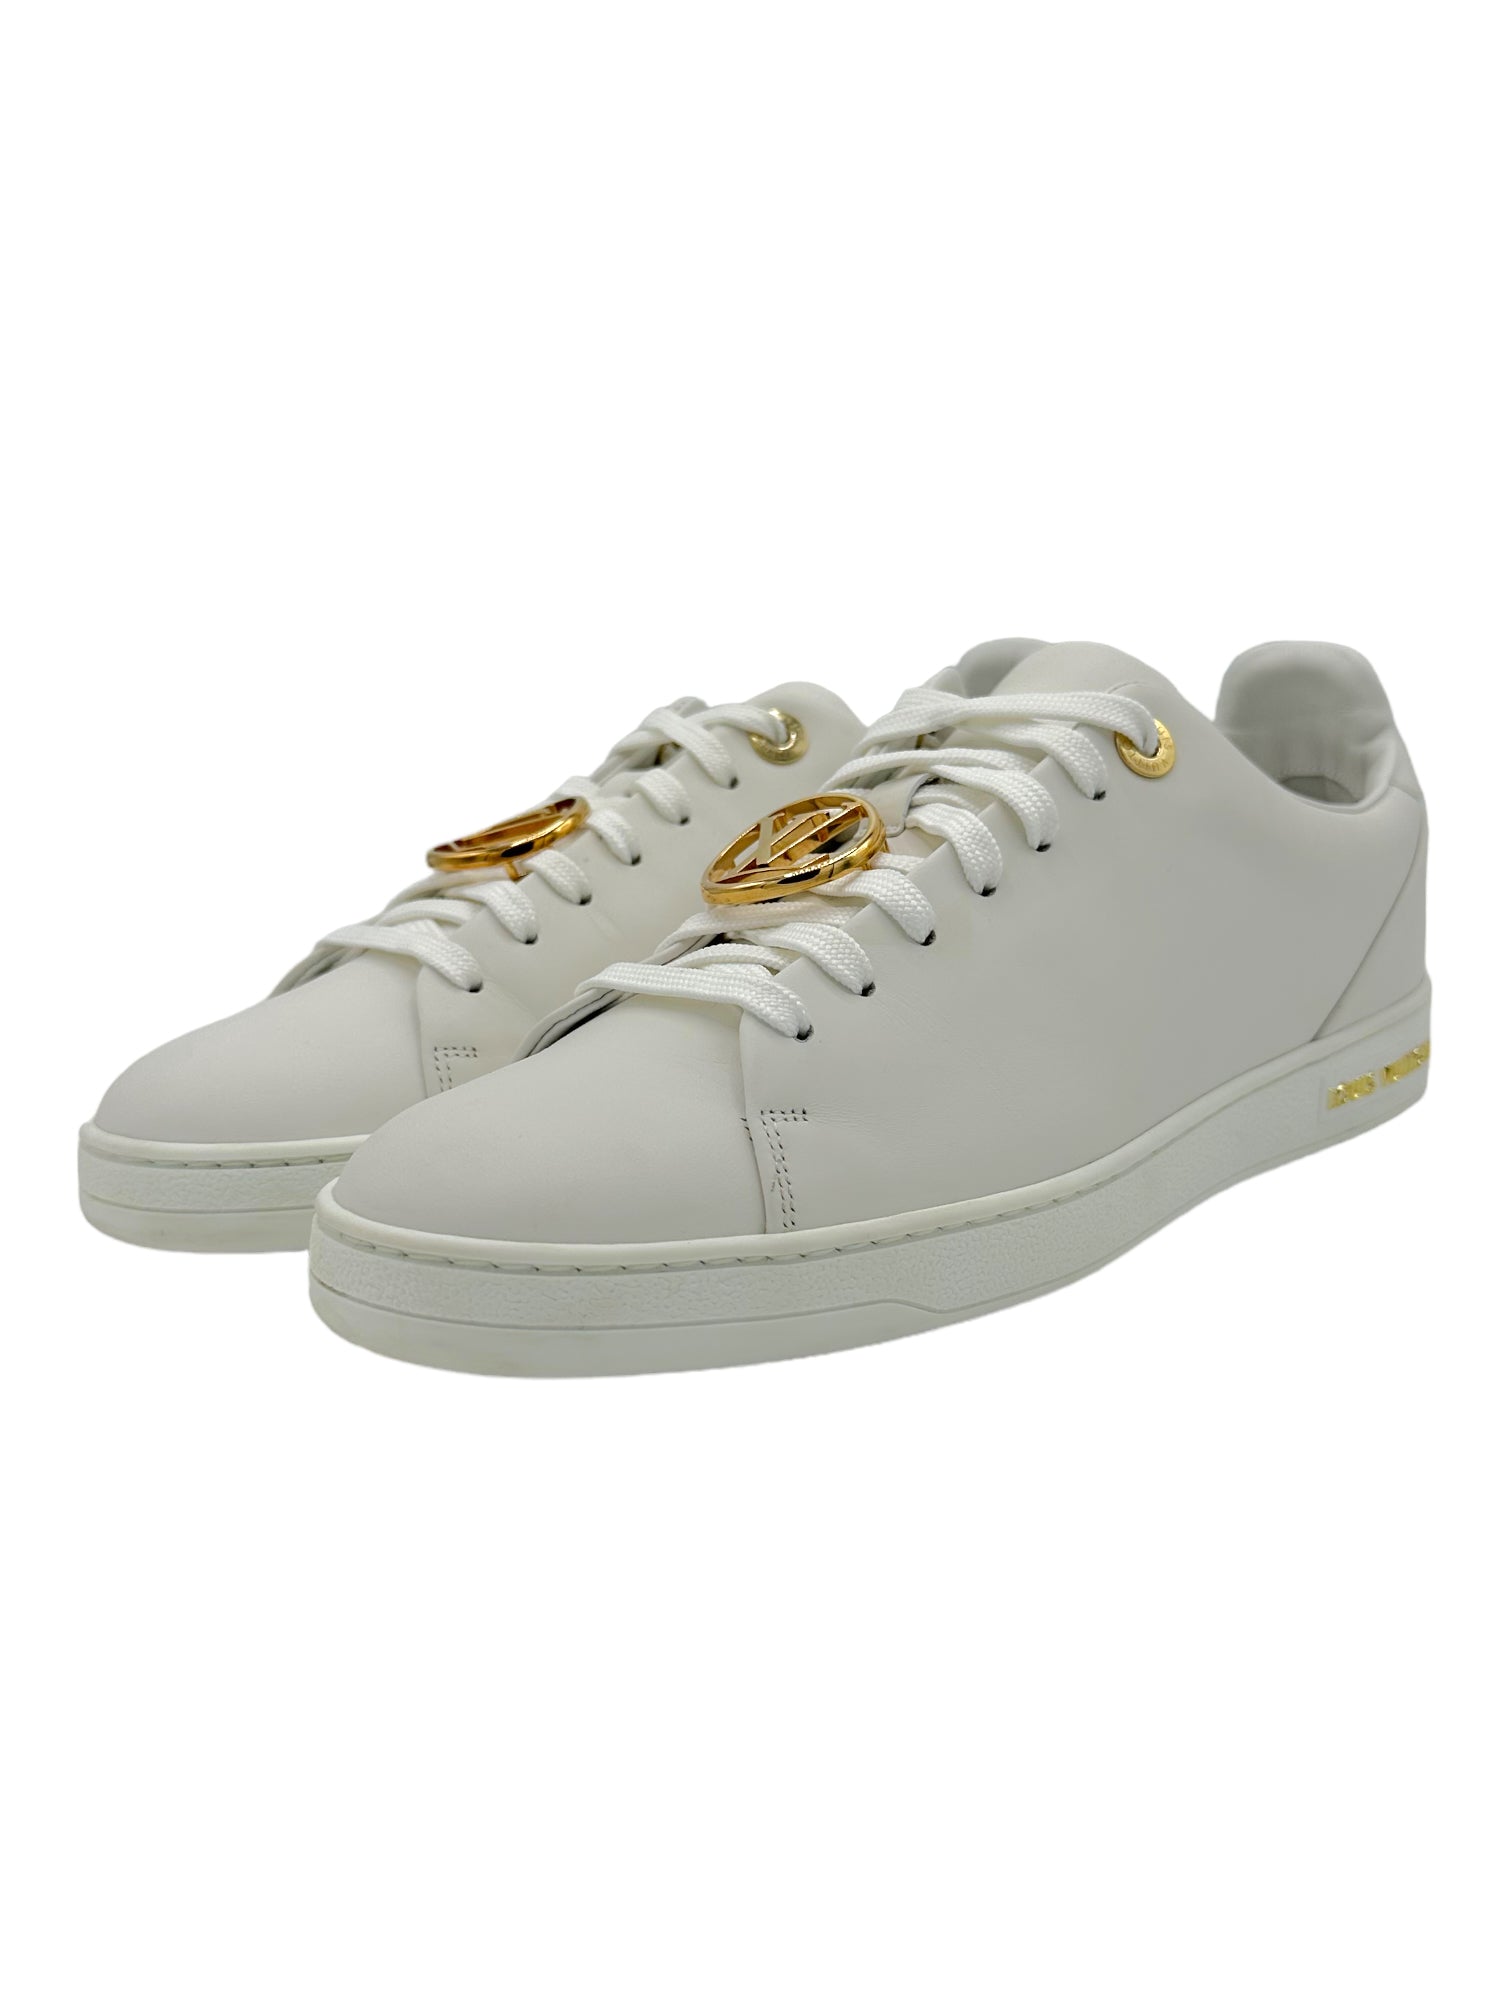 Louis Vuitton Women's White Leather Frontrow Sneakers - Genuine Design Luxury Consignment. New & Pre-Owned Clothing, Shoes, & Accessories. Calgary, Canada